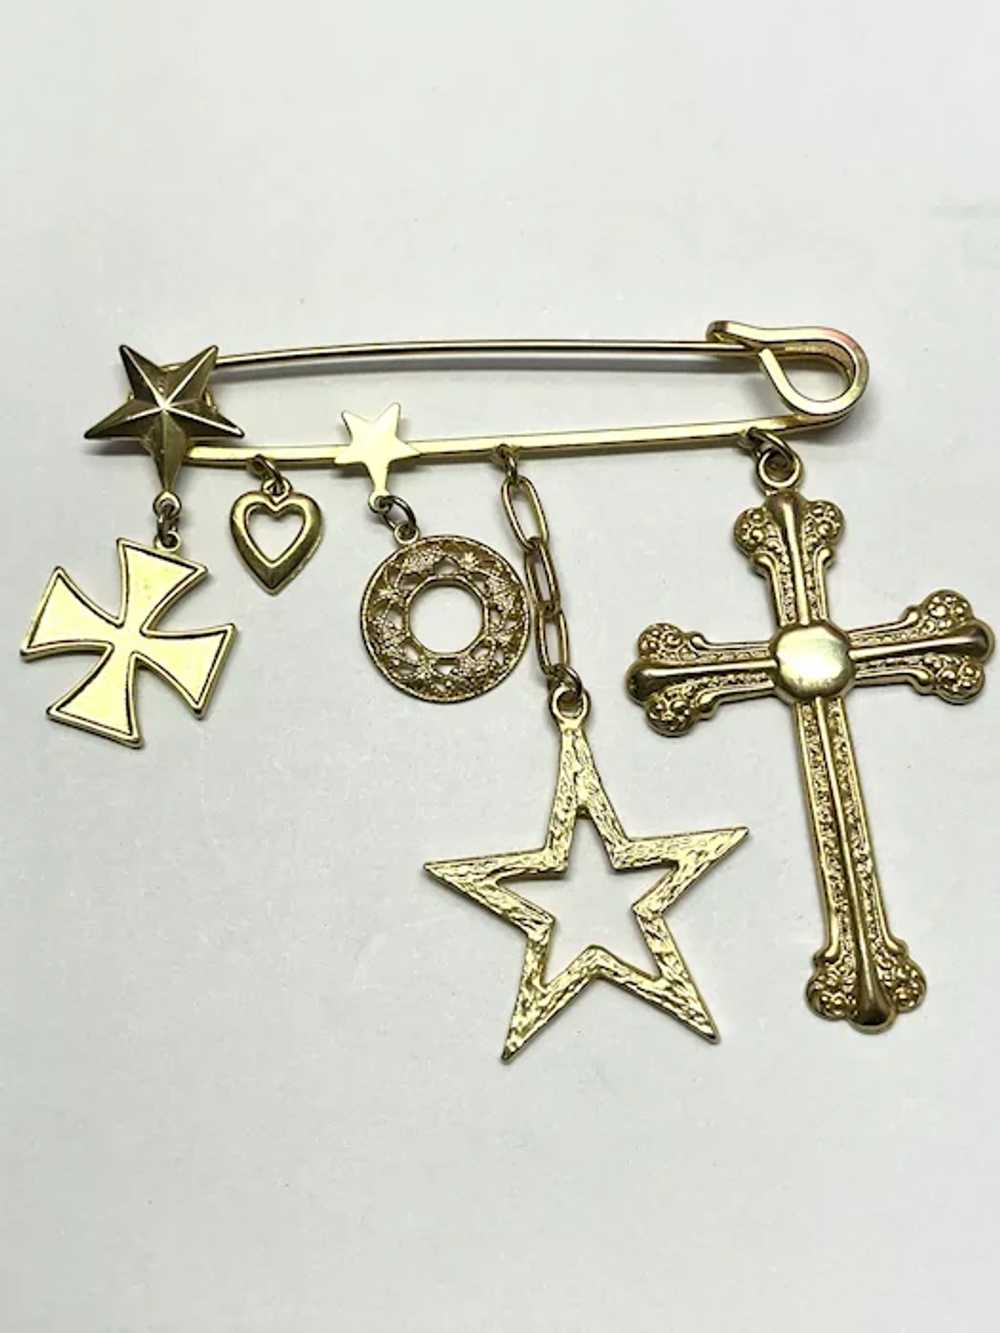 Vintage Gold Safety Pin Charm Brooch Pin - image 3